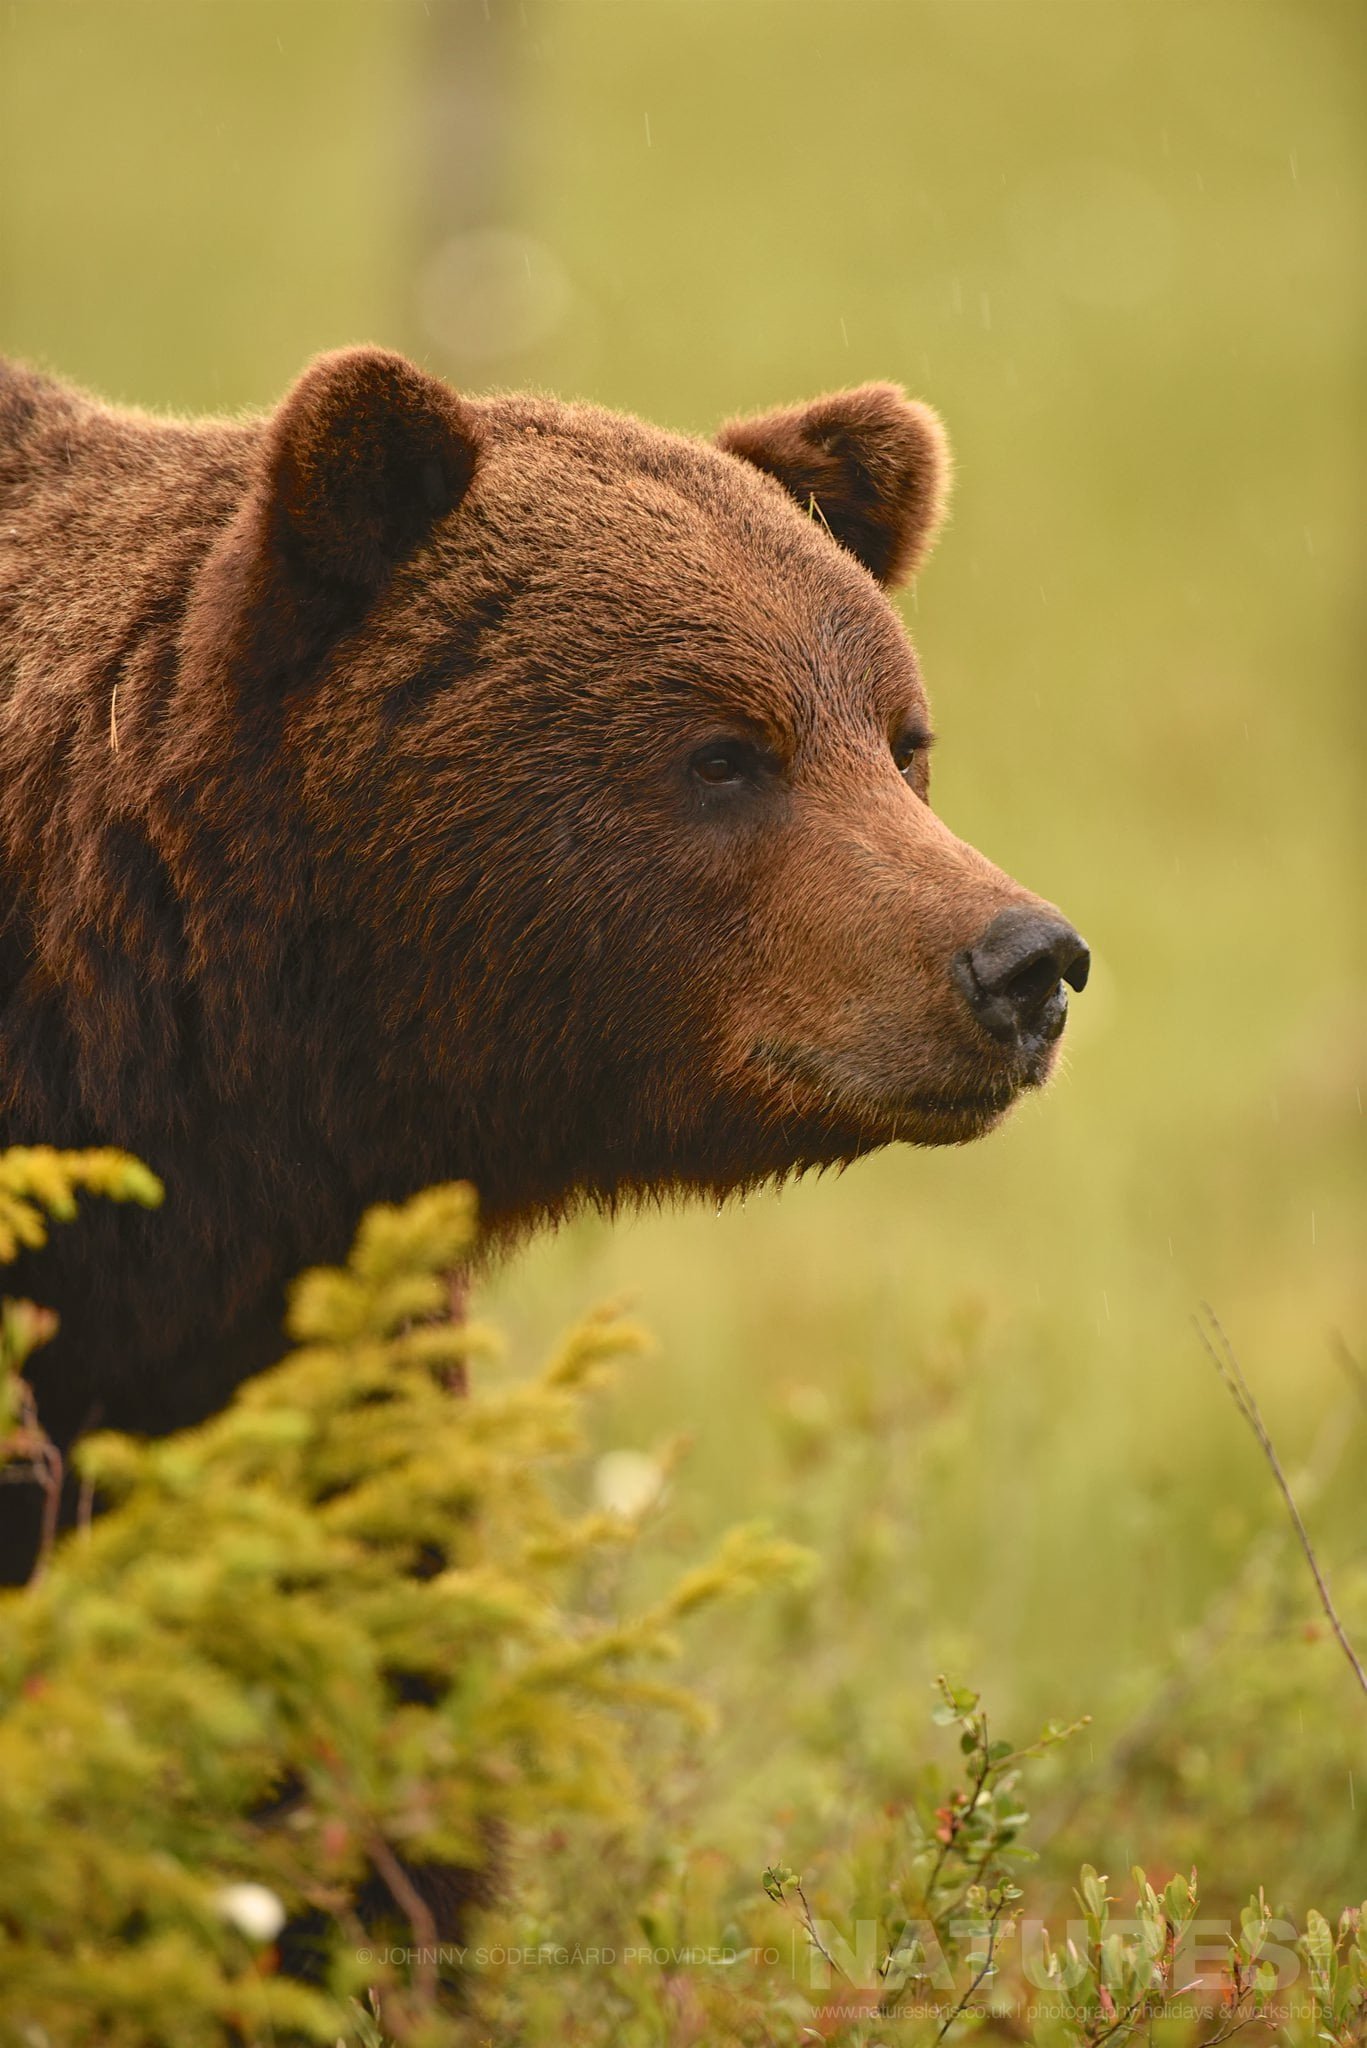 A Close Up Of One Of The Large Bears Photographed By Johnny Södergård During The Natureslens Wild Brown Bears Of Finland Photography Holiday